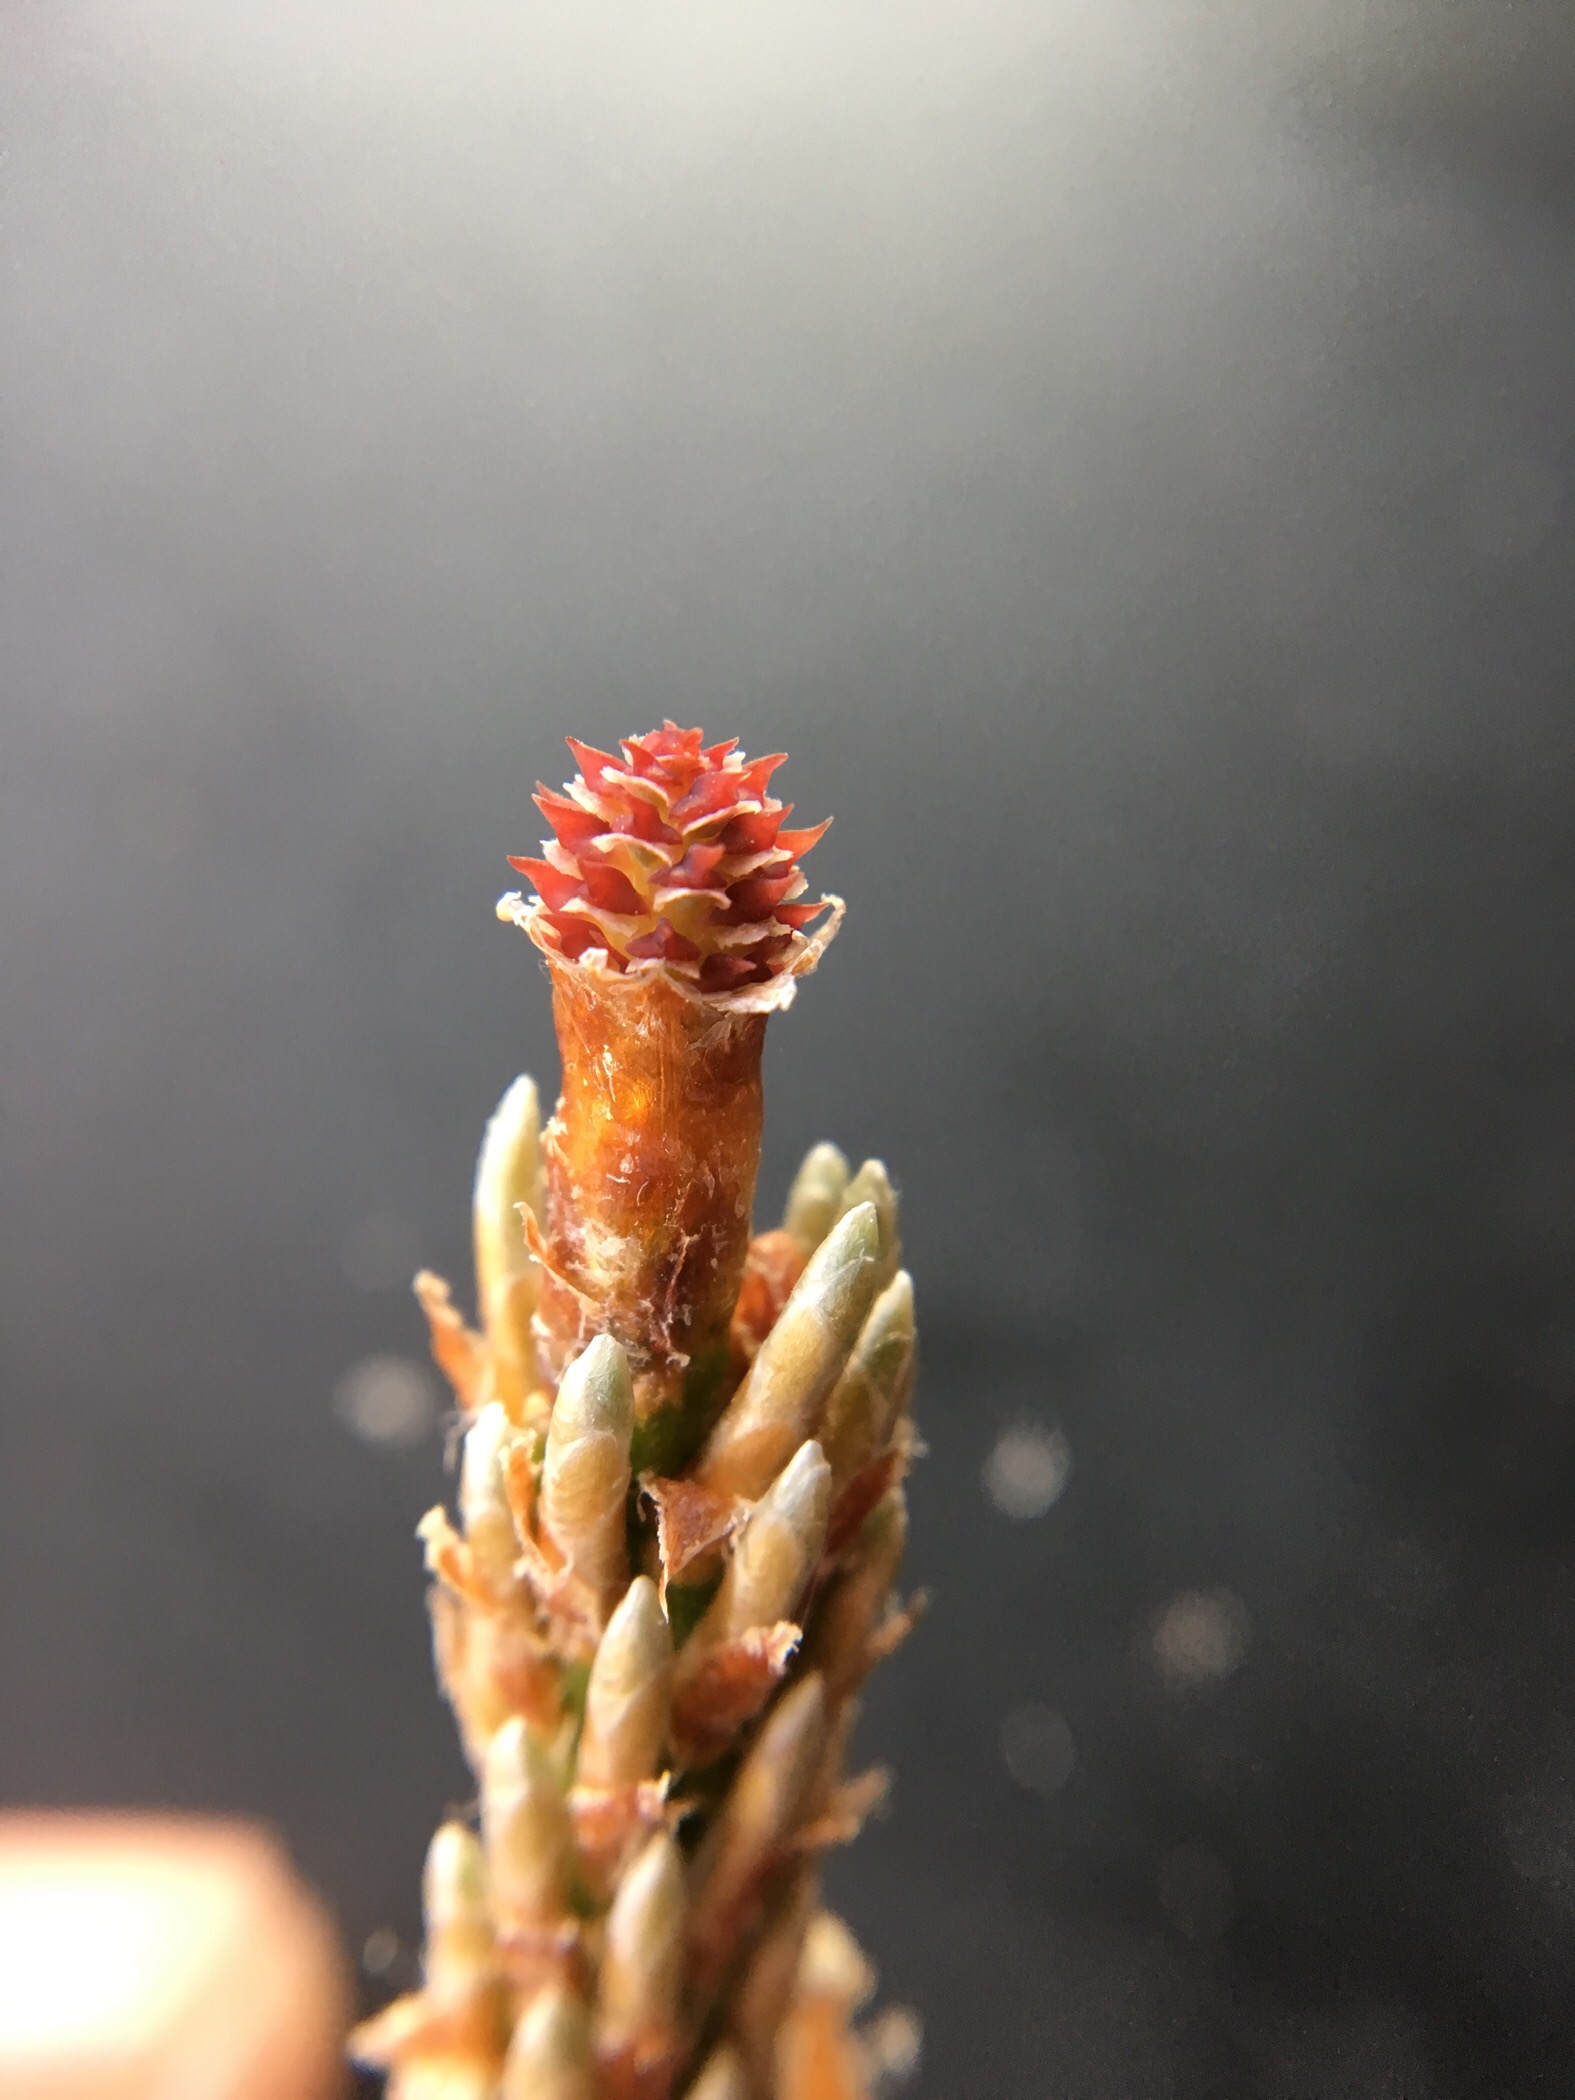 Female cone is small and red, the tip has newly elongated branches. Below the cone are clusters of leaves just starting to expand.